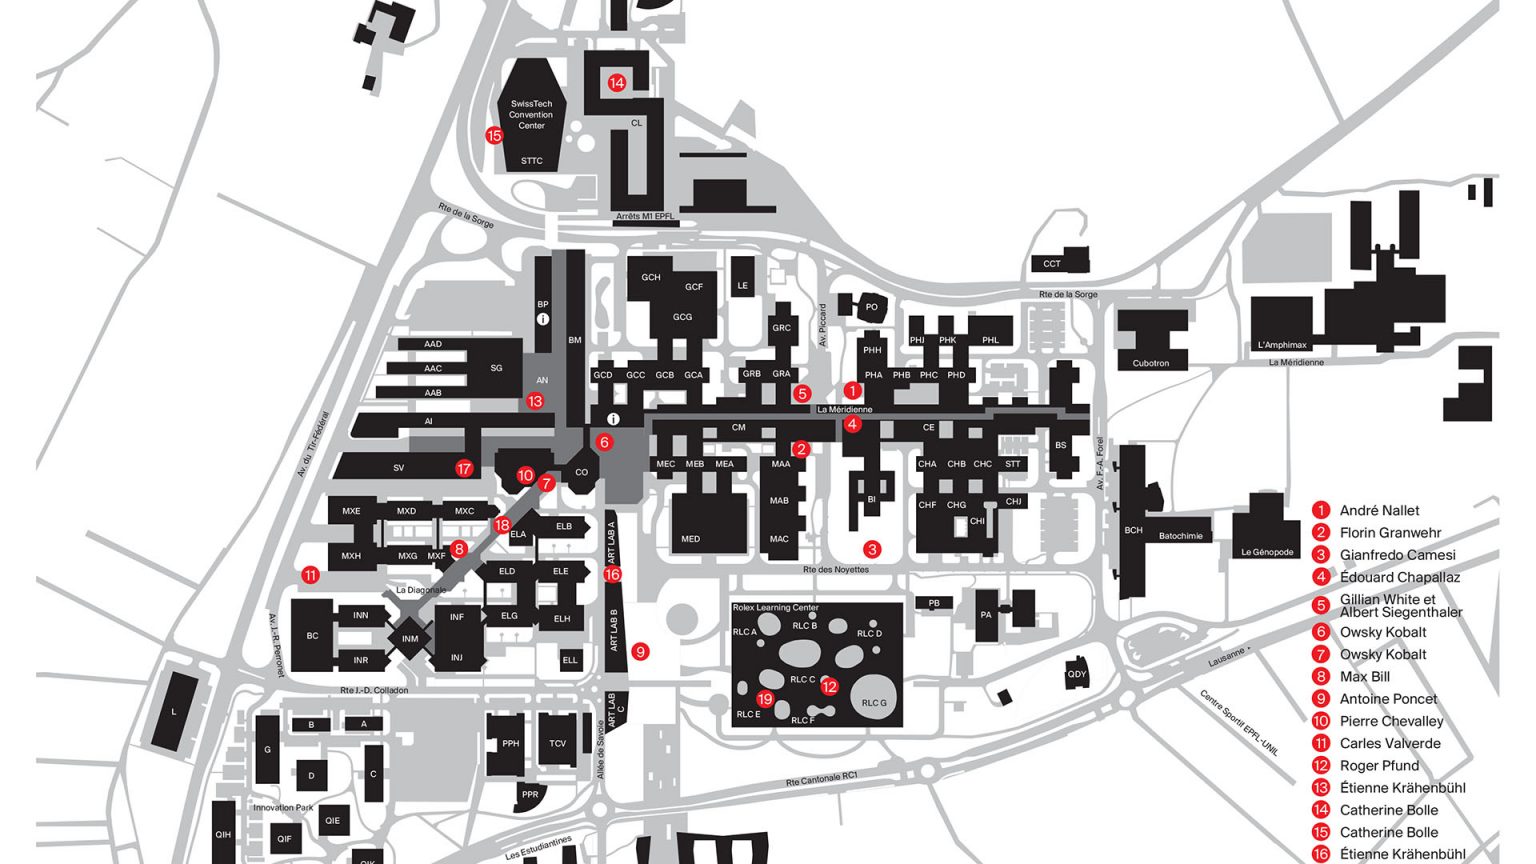 Location map of the fixed works of art on the EPFL campus.